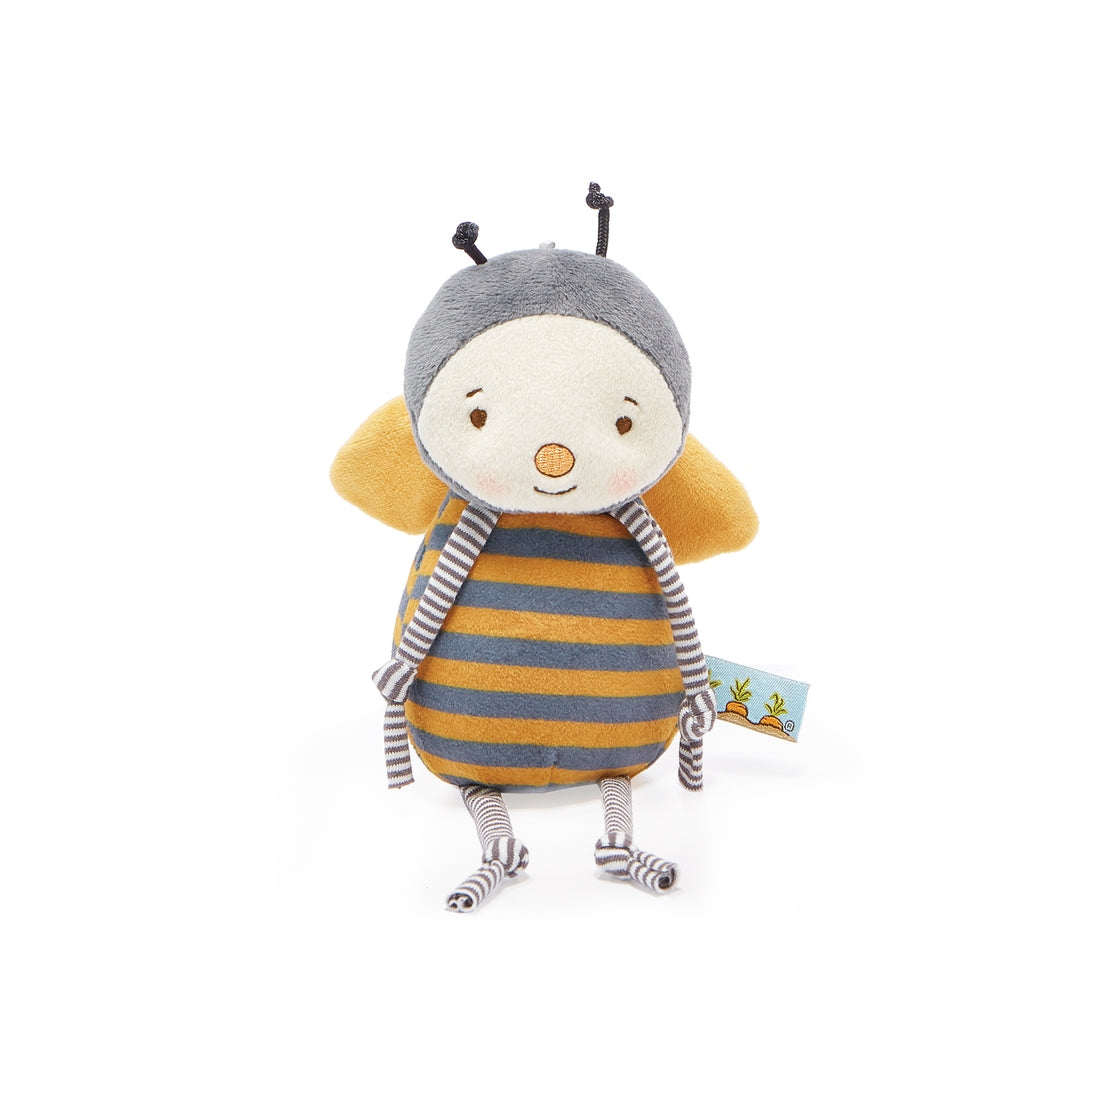 Spring toys for kids. Buzzbee bee toy.